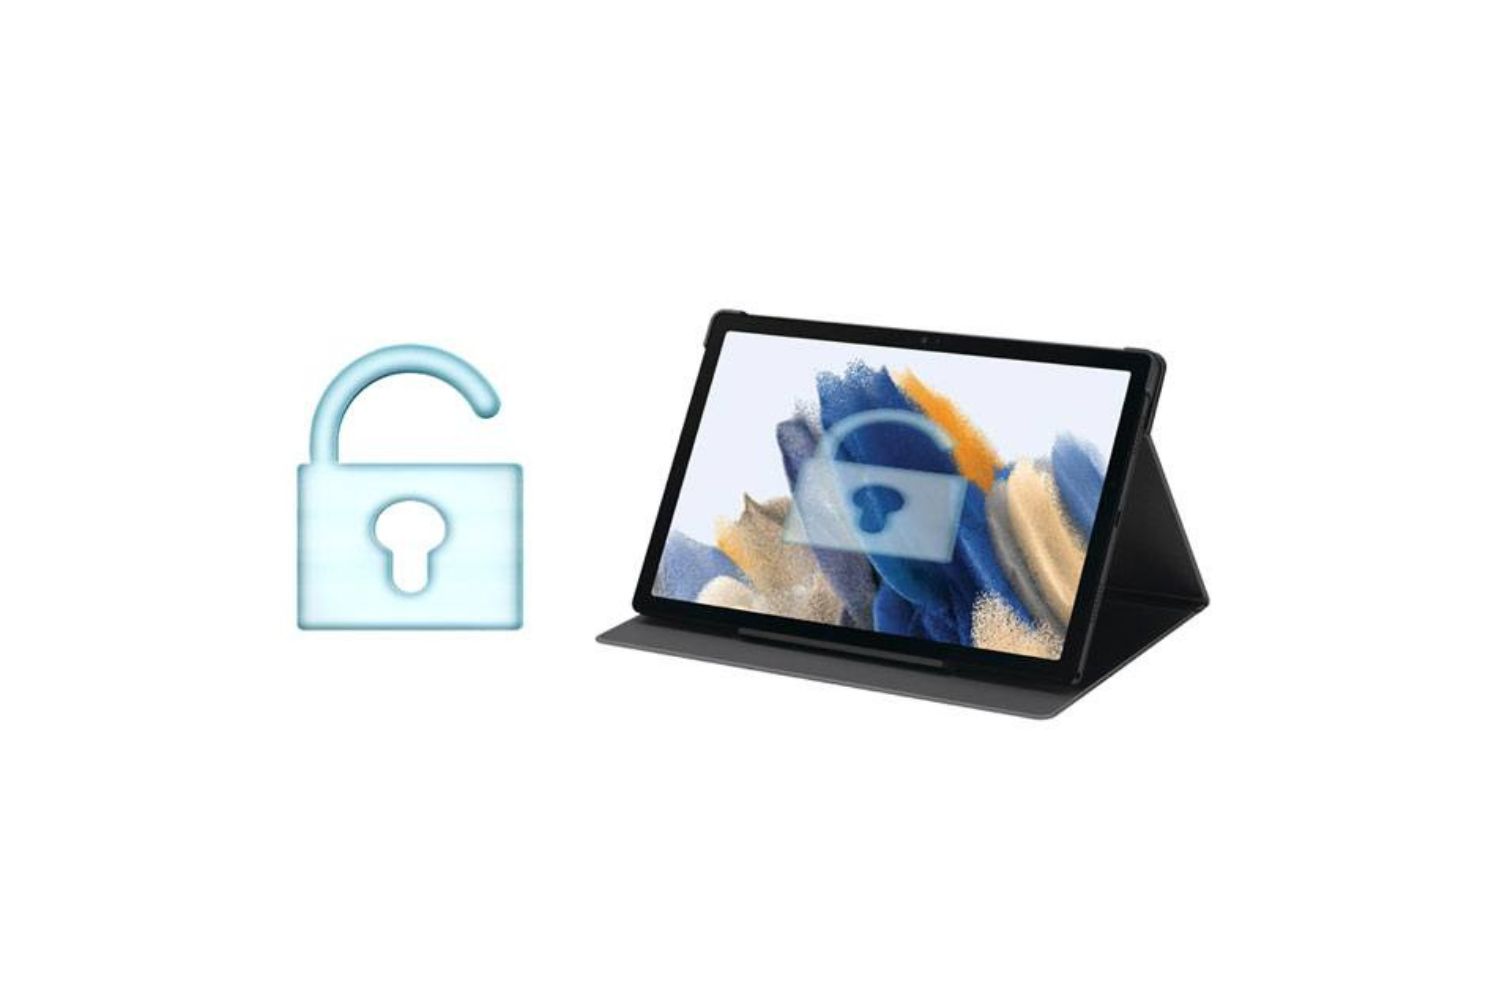 How To Unlock A Locked Samsung Tablet